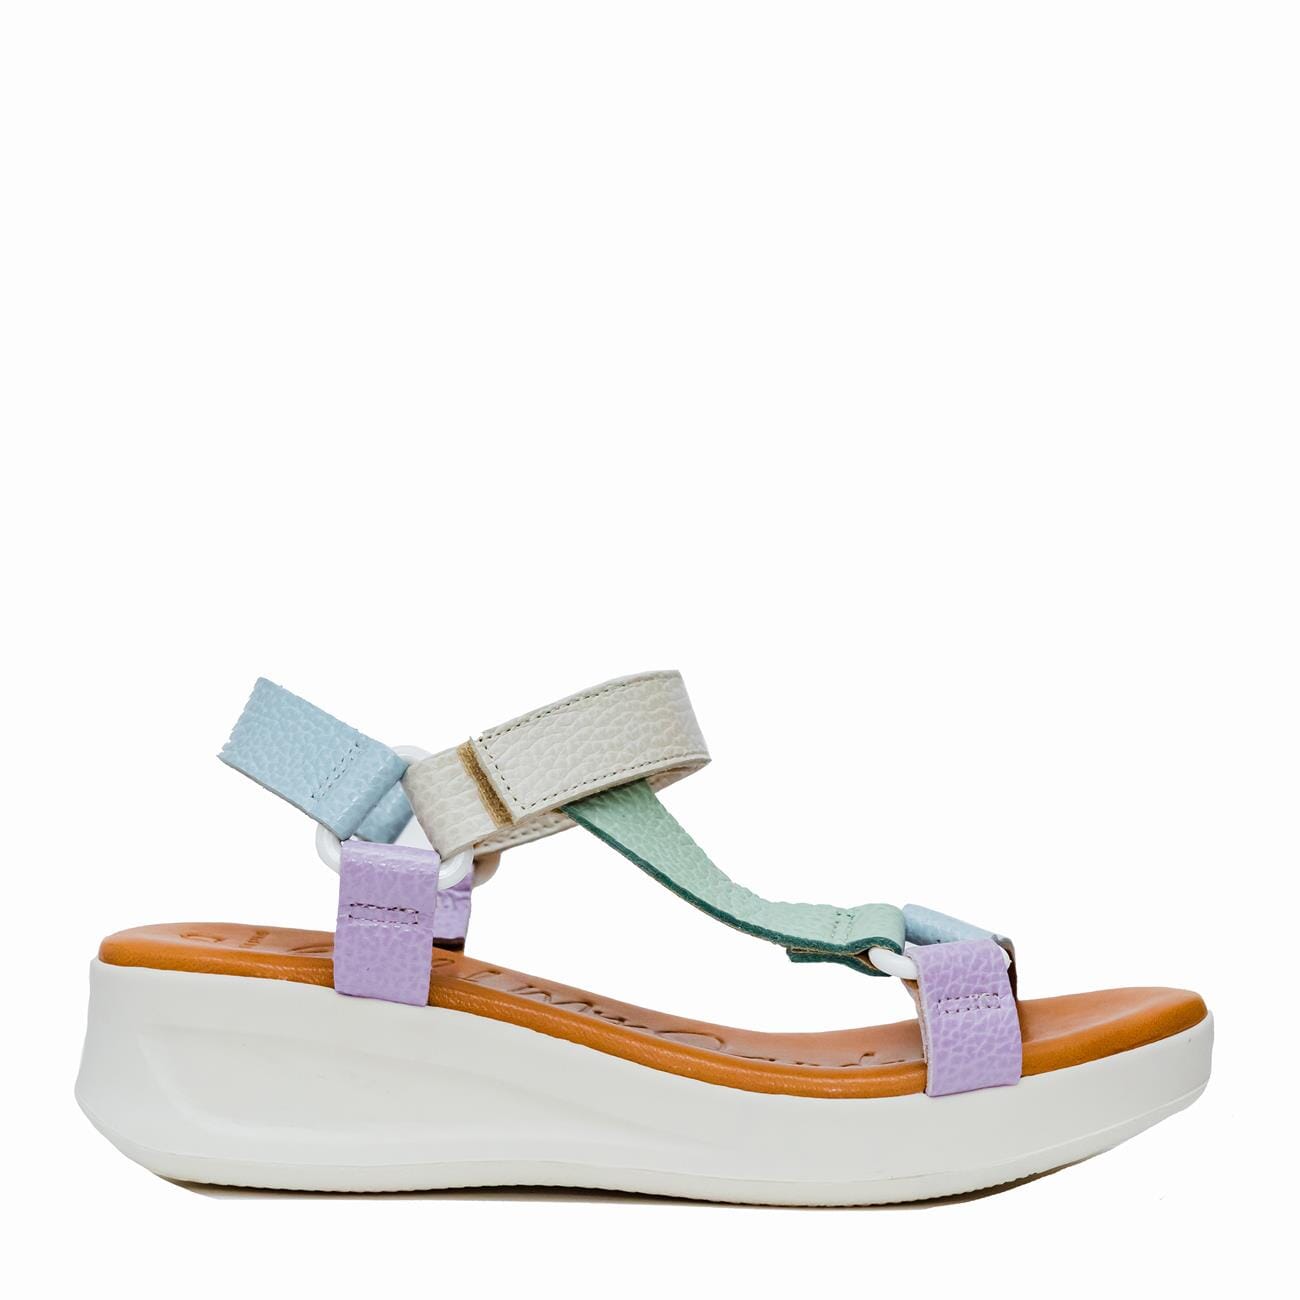 5186 Spanish leather Sport delux sandals/wedge with velcro in Pastel colour sandals Sam Star Shoes Pastel colour 36/3 